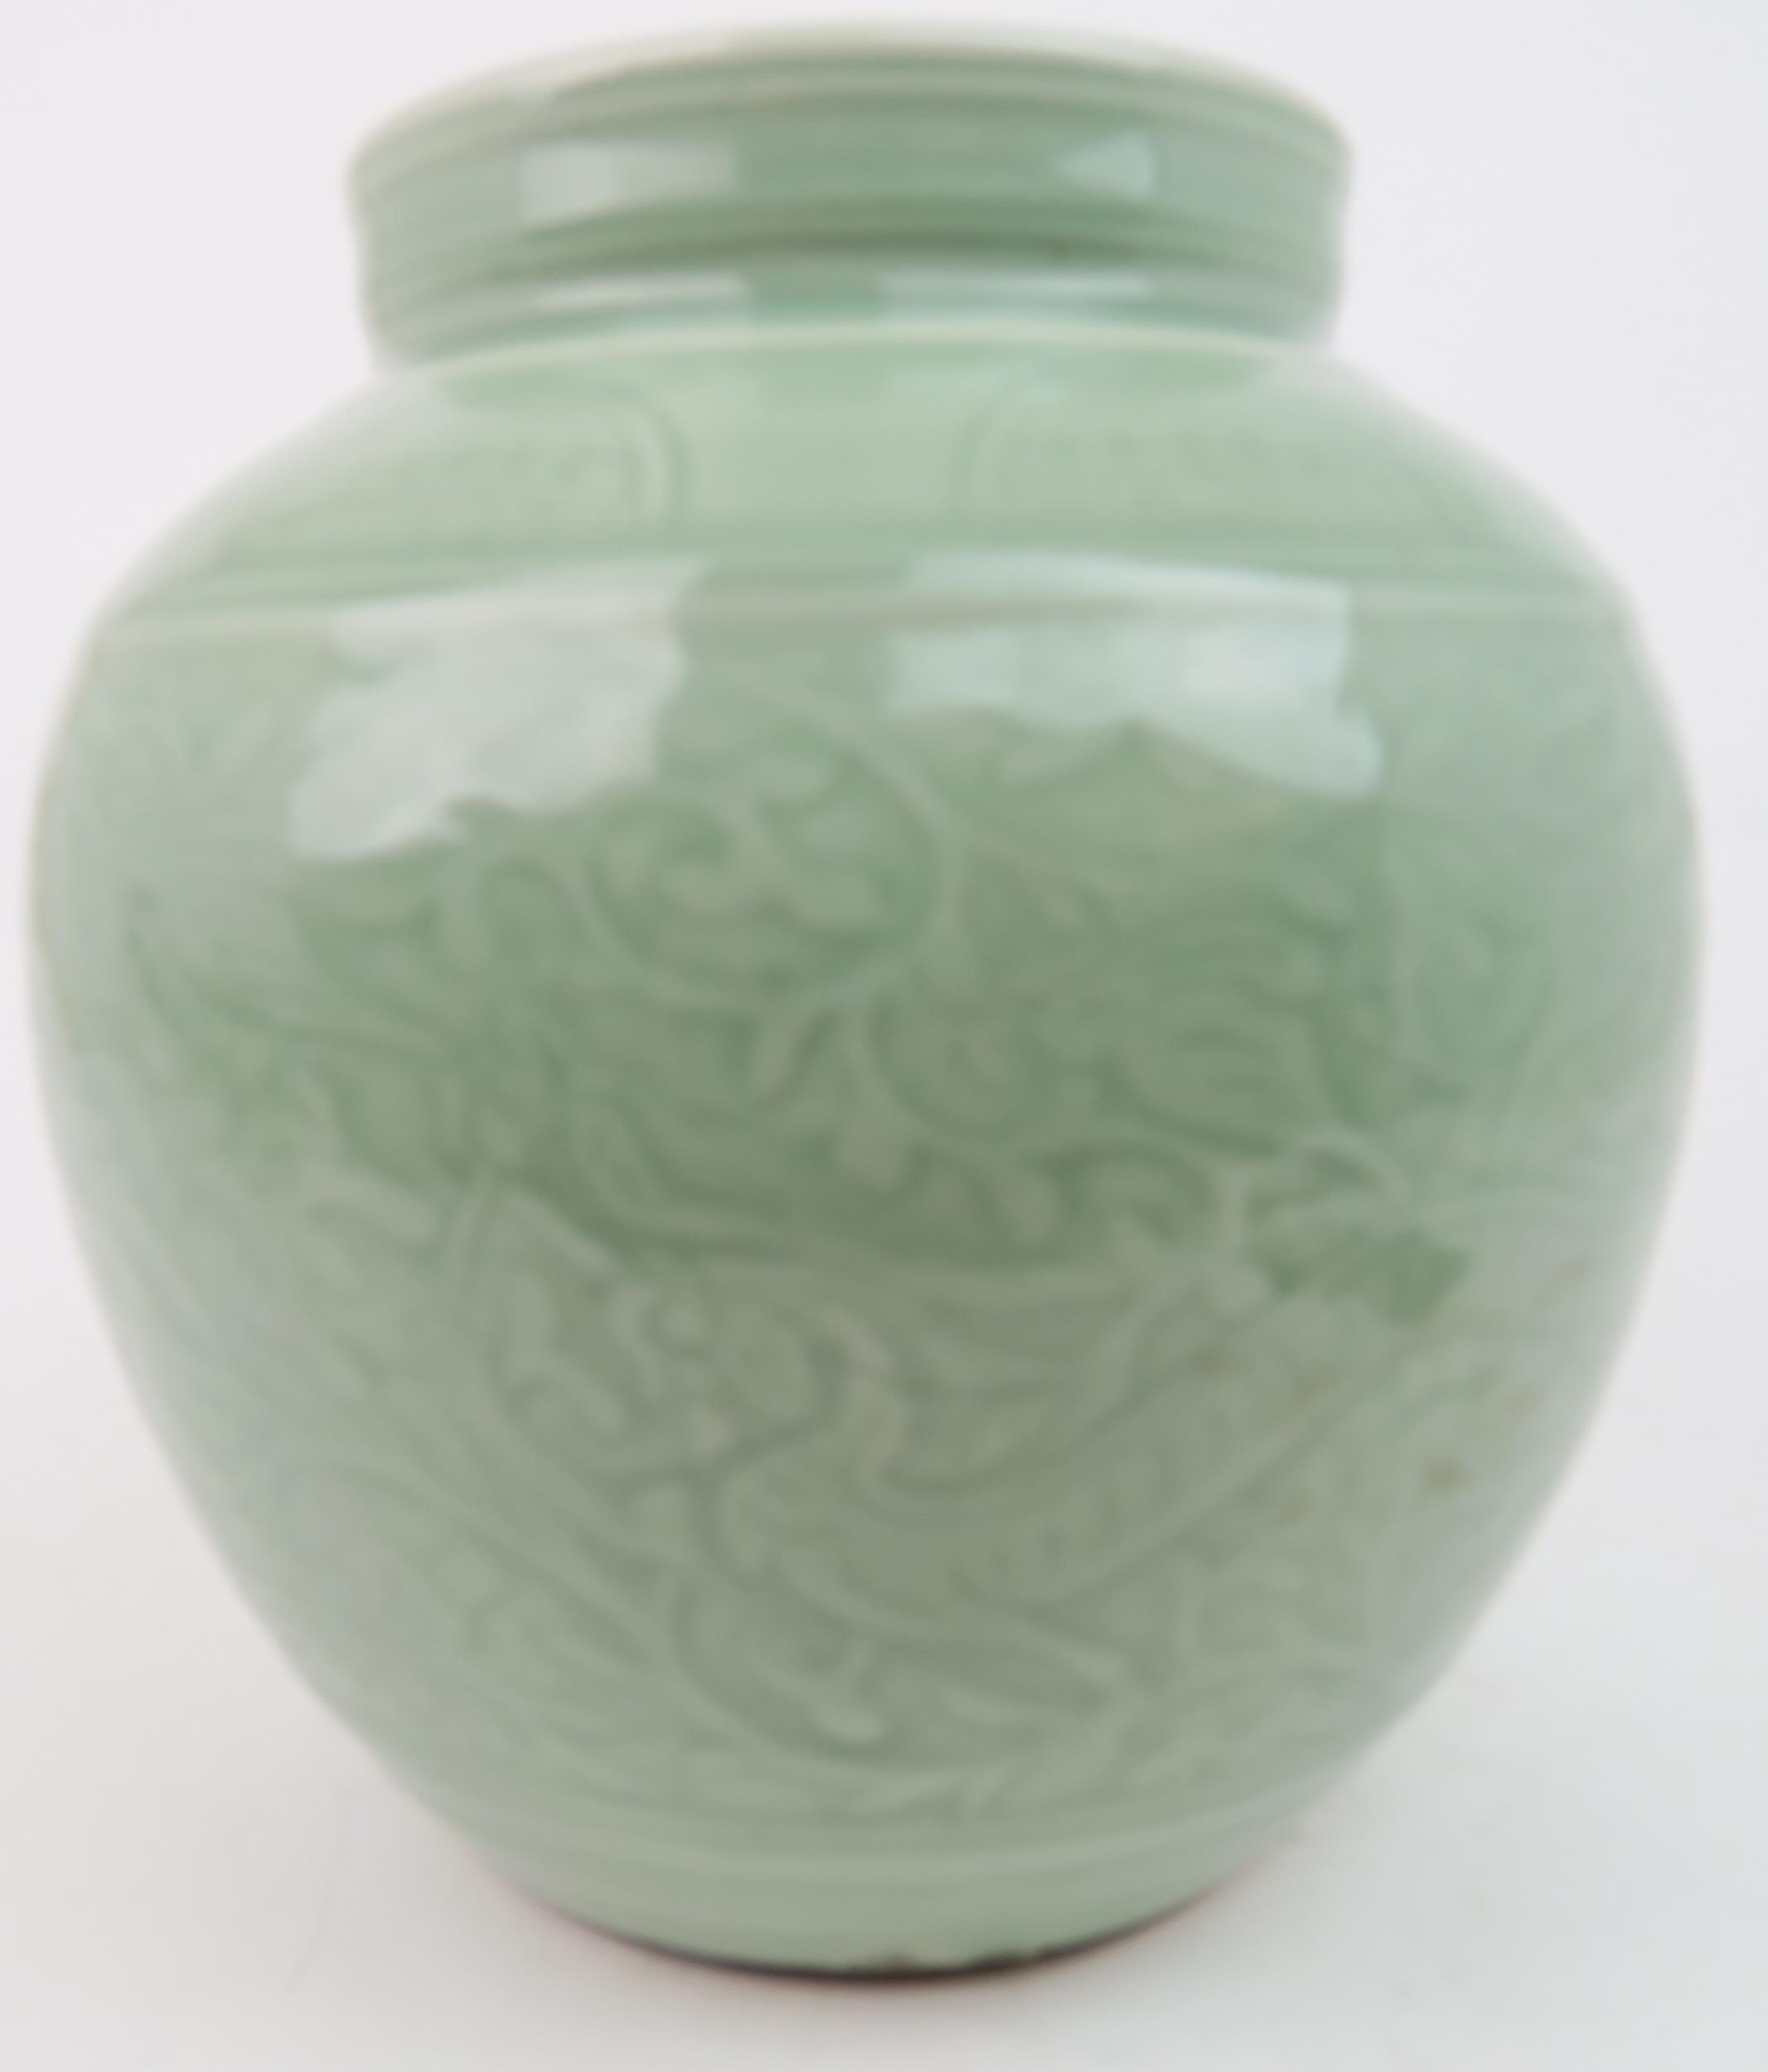 A CHINESE CELADON VASE  Carved with an archaic band above scrolling foliage, and horizontal banding, - Image 10 of 12